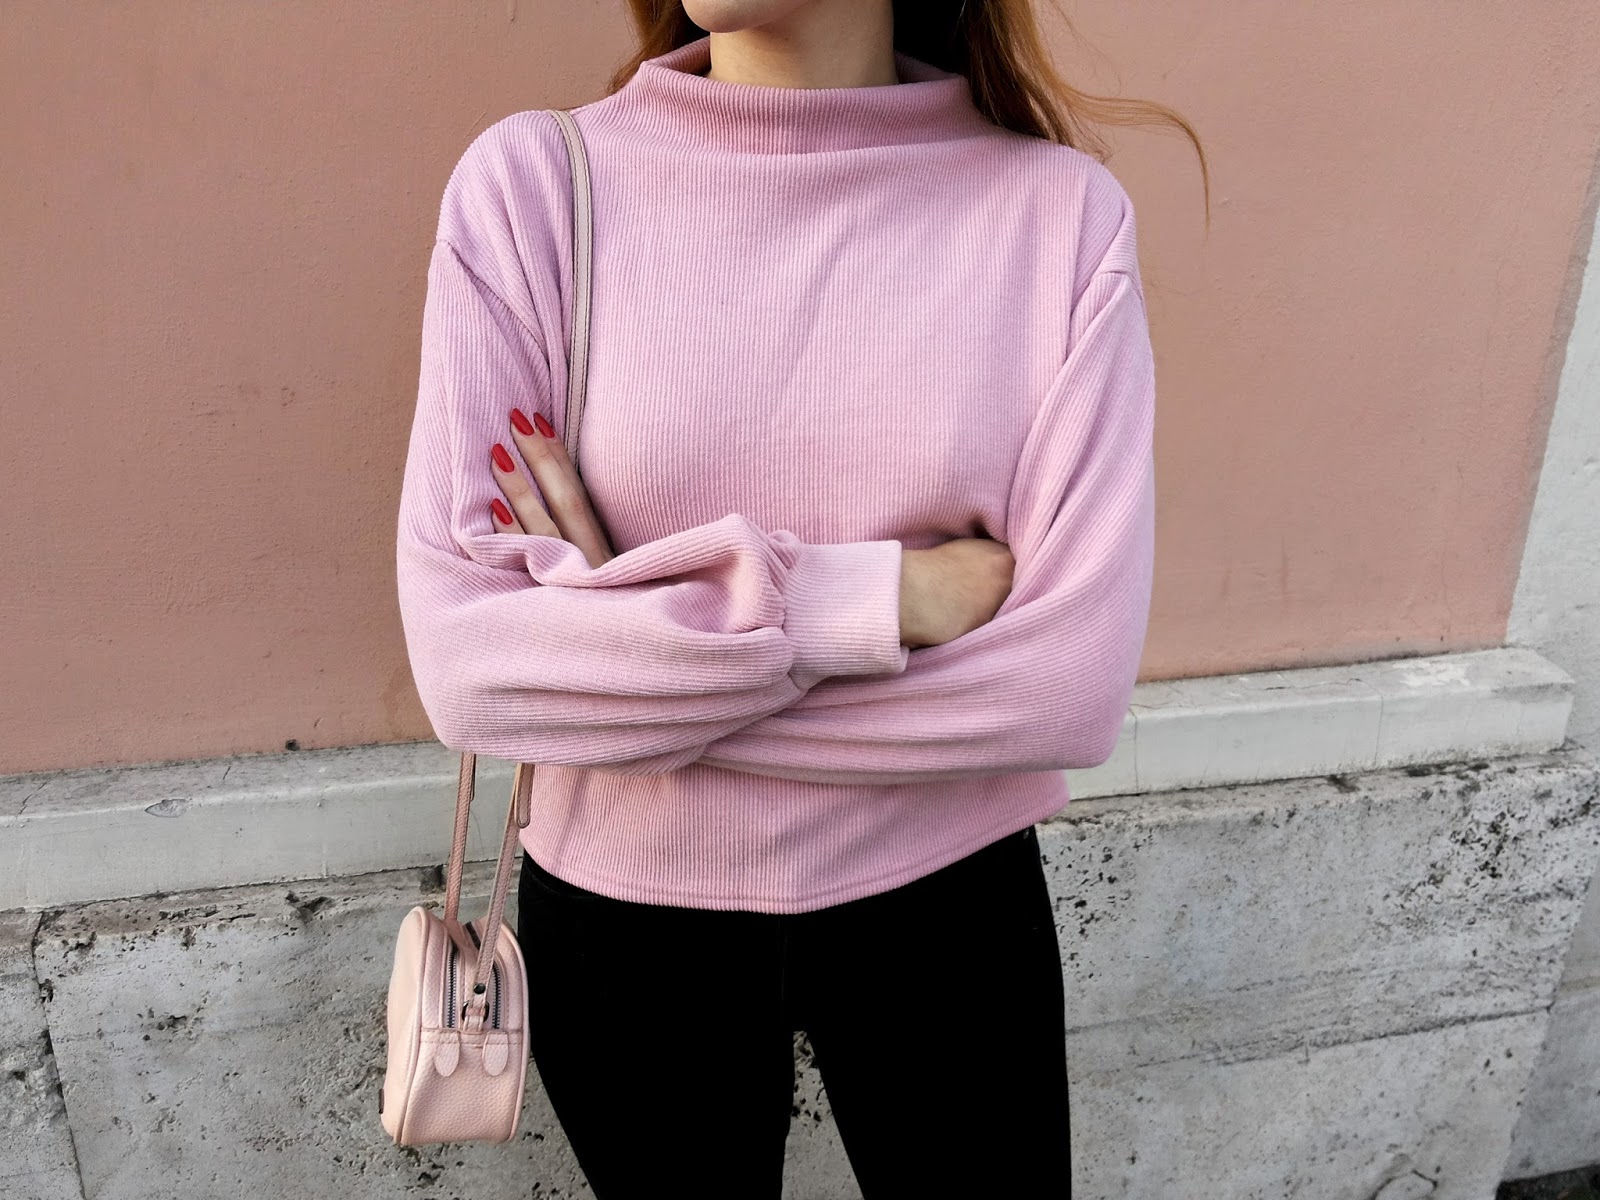 Eva Redson: Pink in the City - A Winter 2017 Outfit